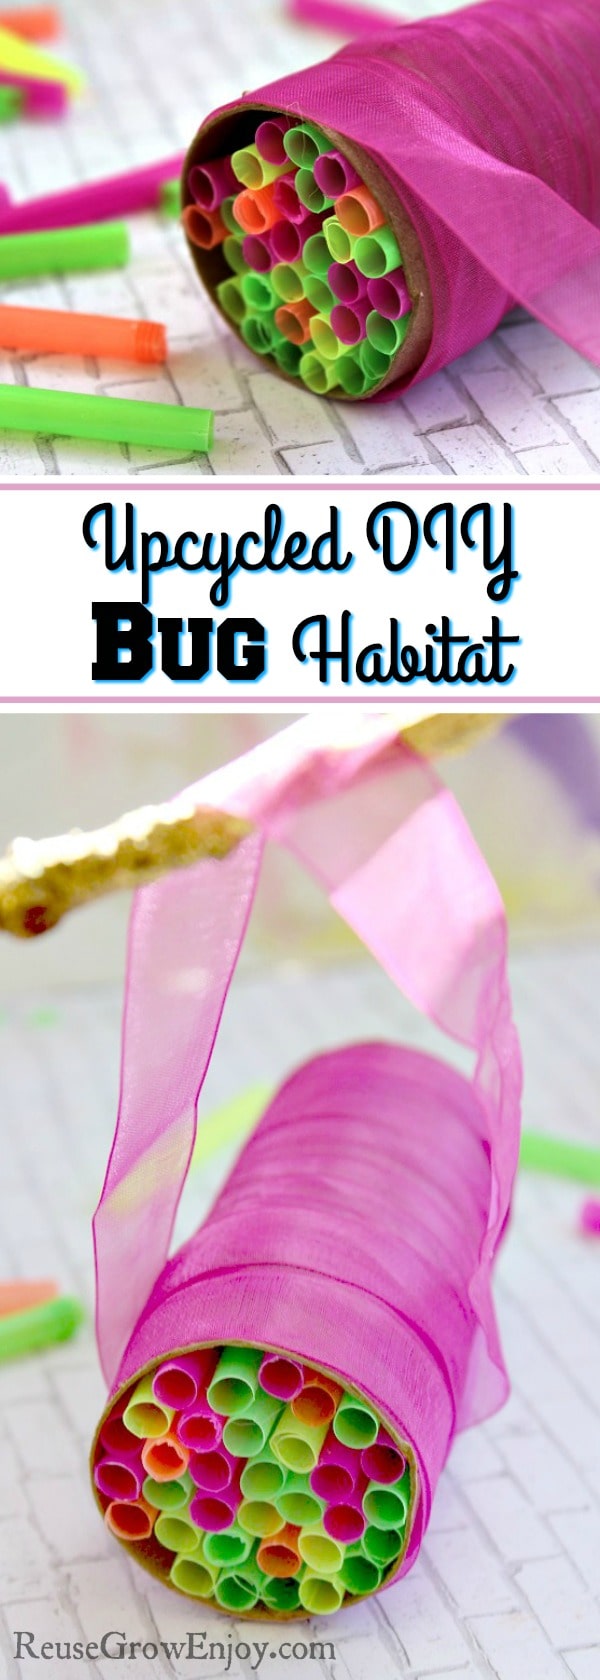 Looking for a fun project to do with the kiddos? Check out this DIY Bug Habitat Made With Upcycled & Reused Items!